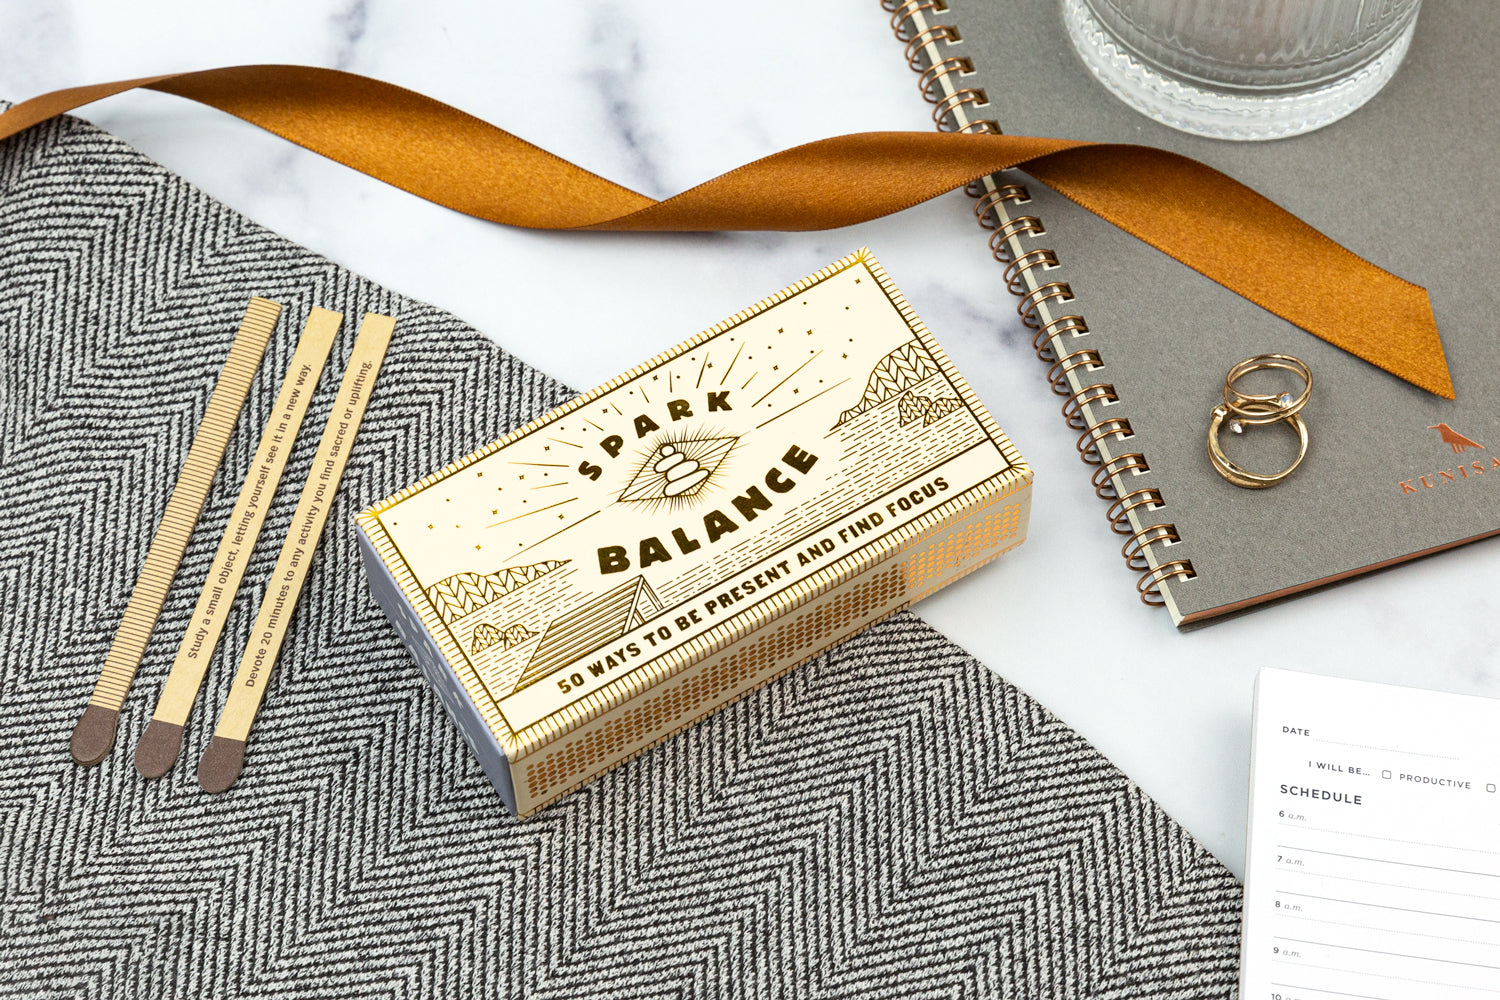 A spark balance gift set on a marble tabletop with a tan colored ribbon